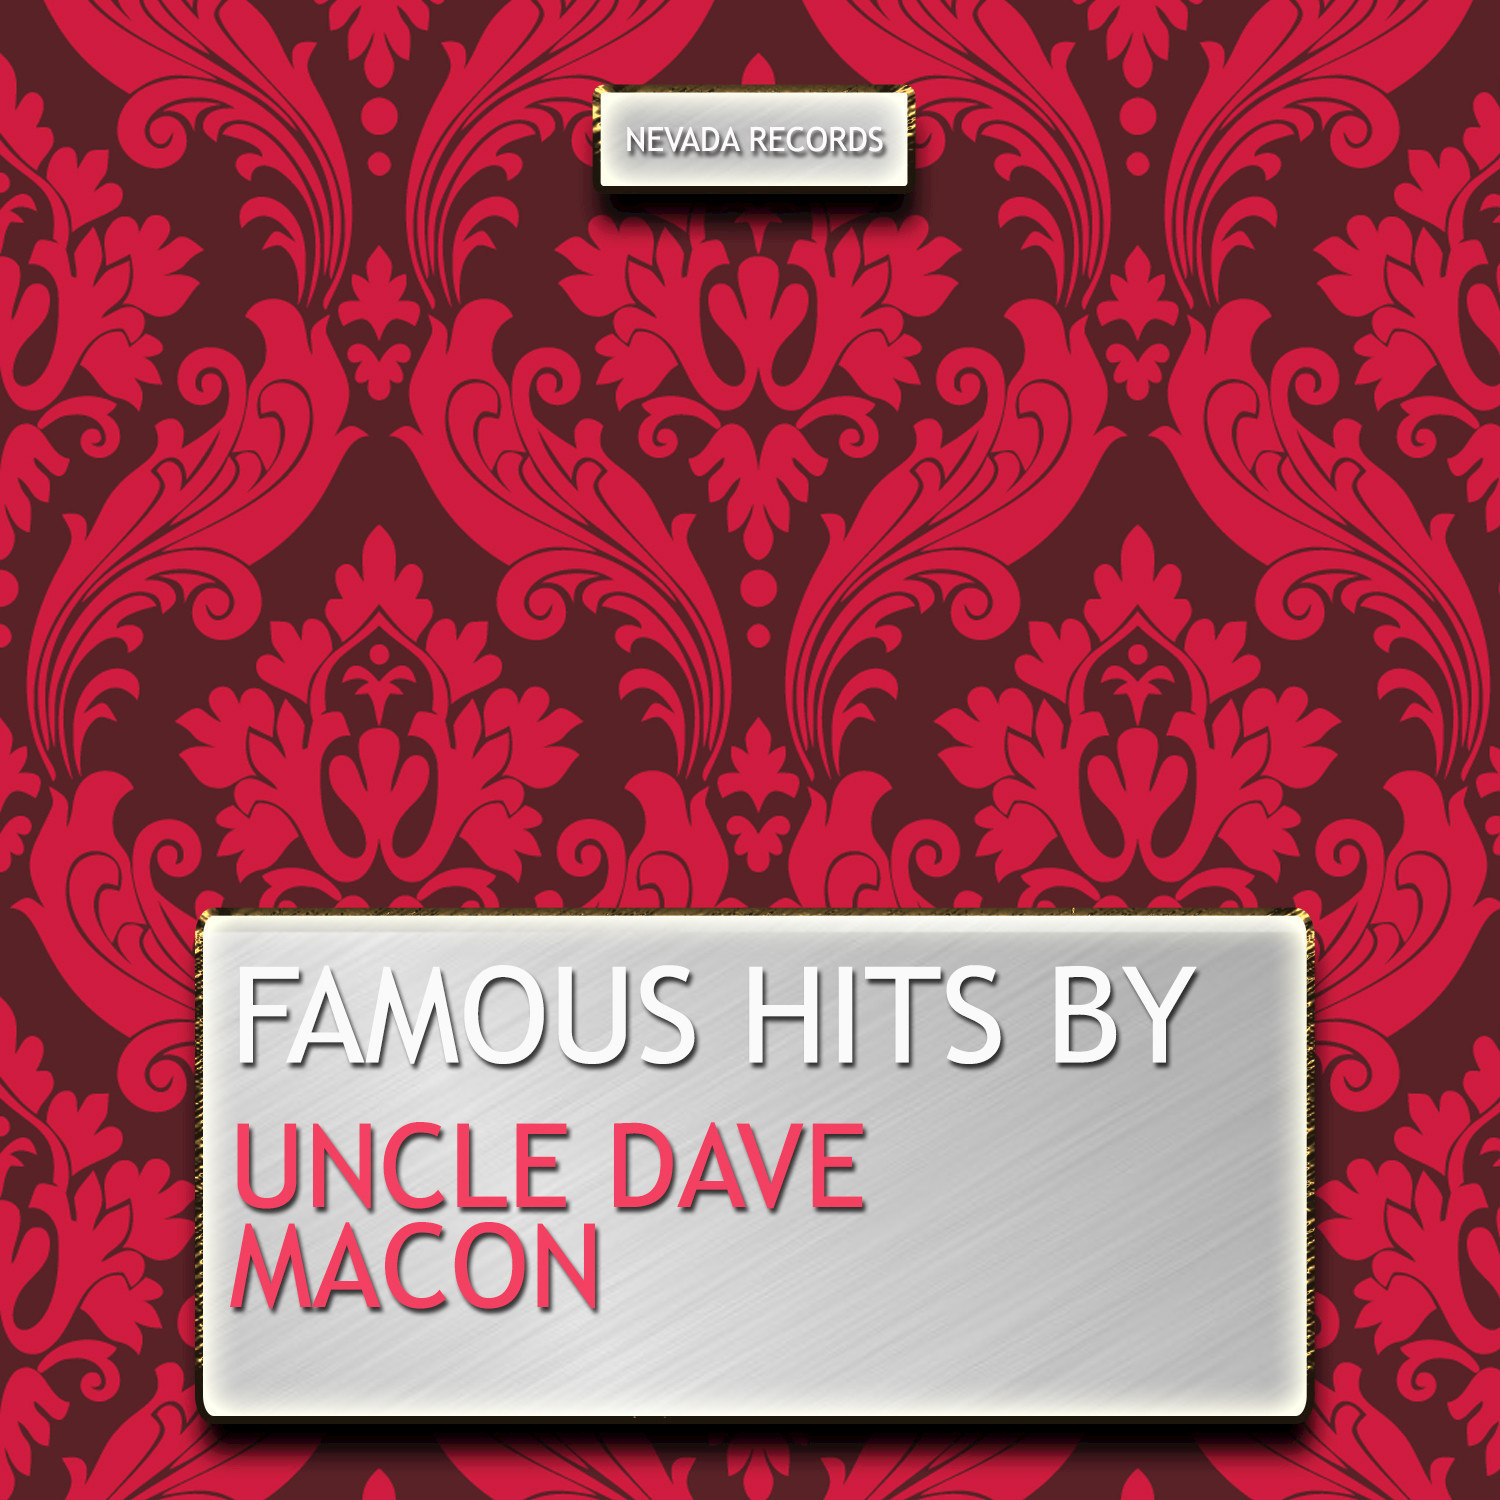 Famous Hits By Uncle Dave Macon